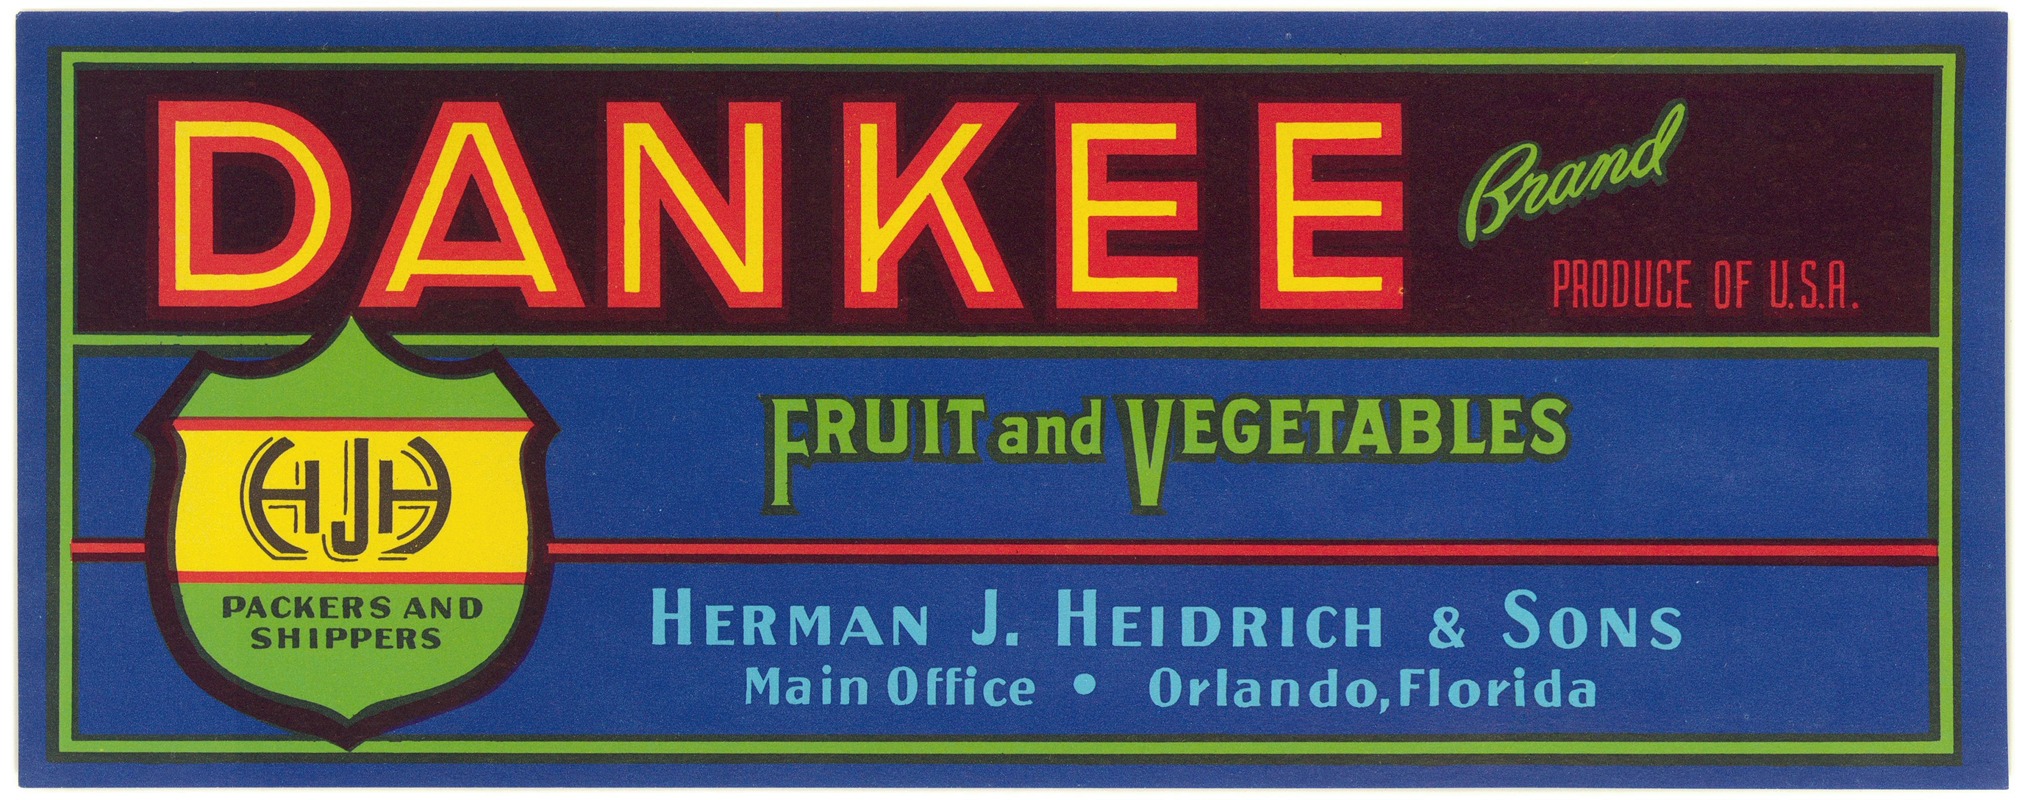 Anonymous - Dankee Brand Fruit and Vegetables Label